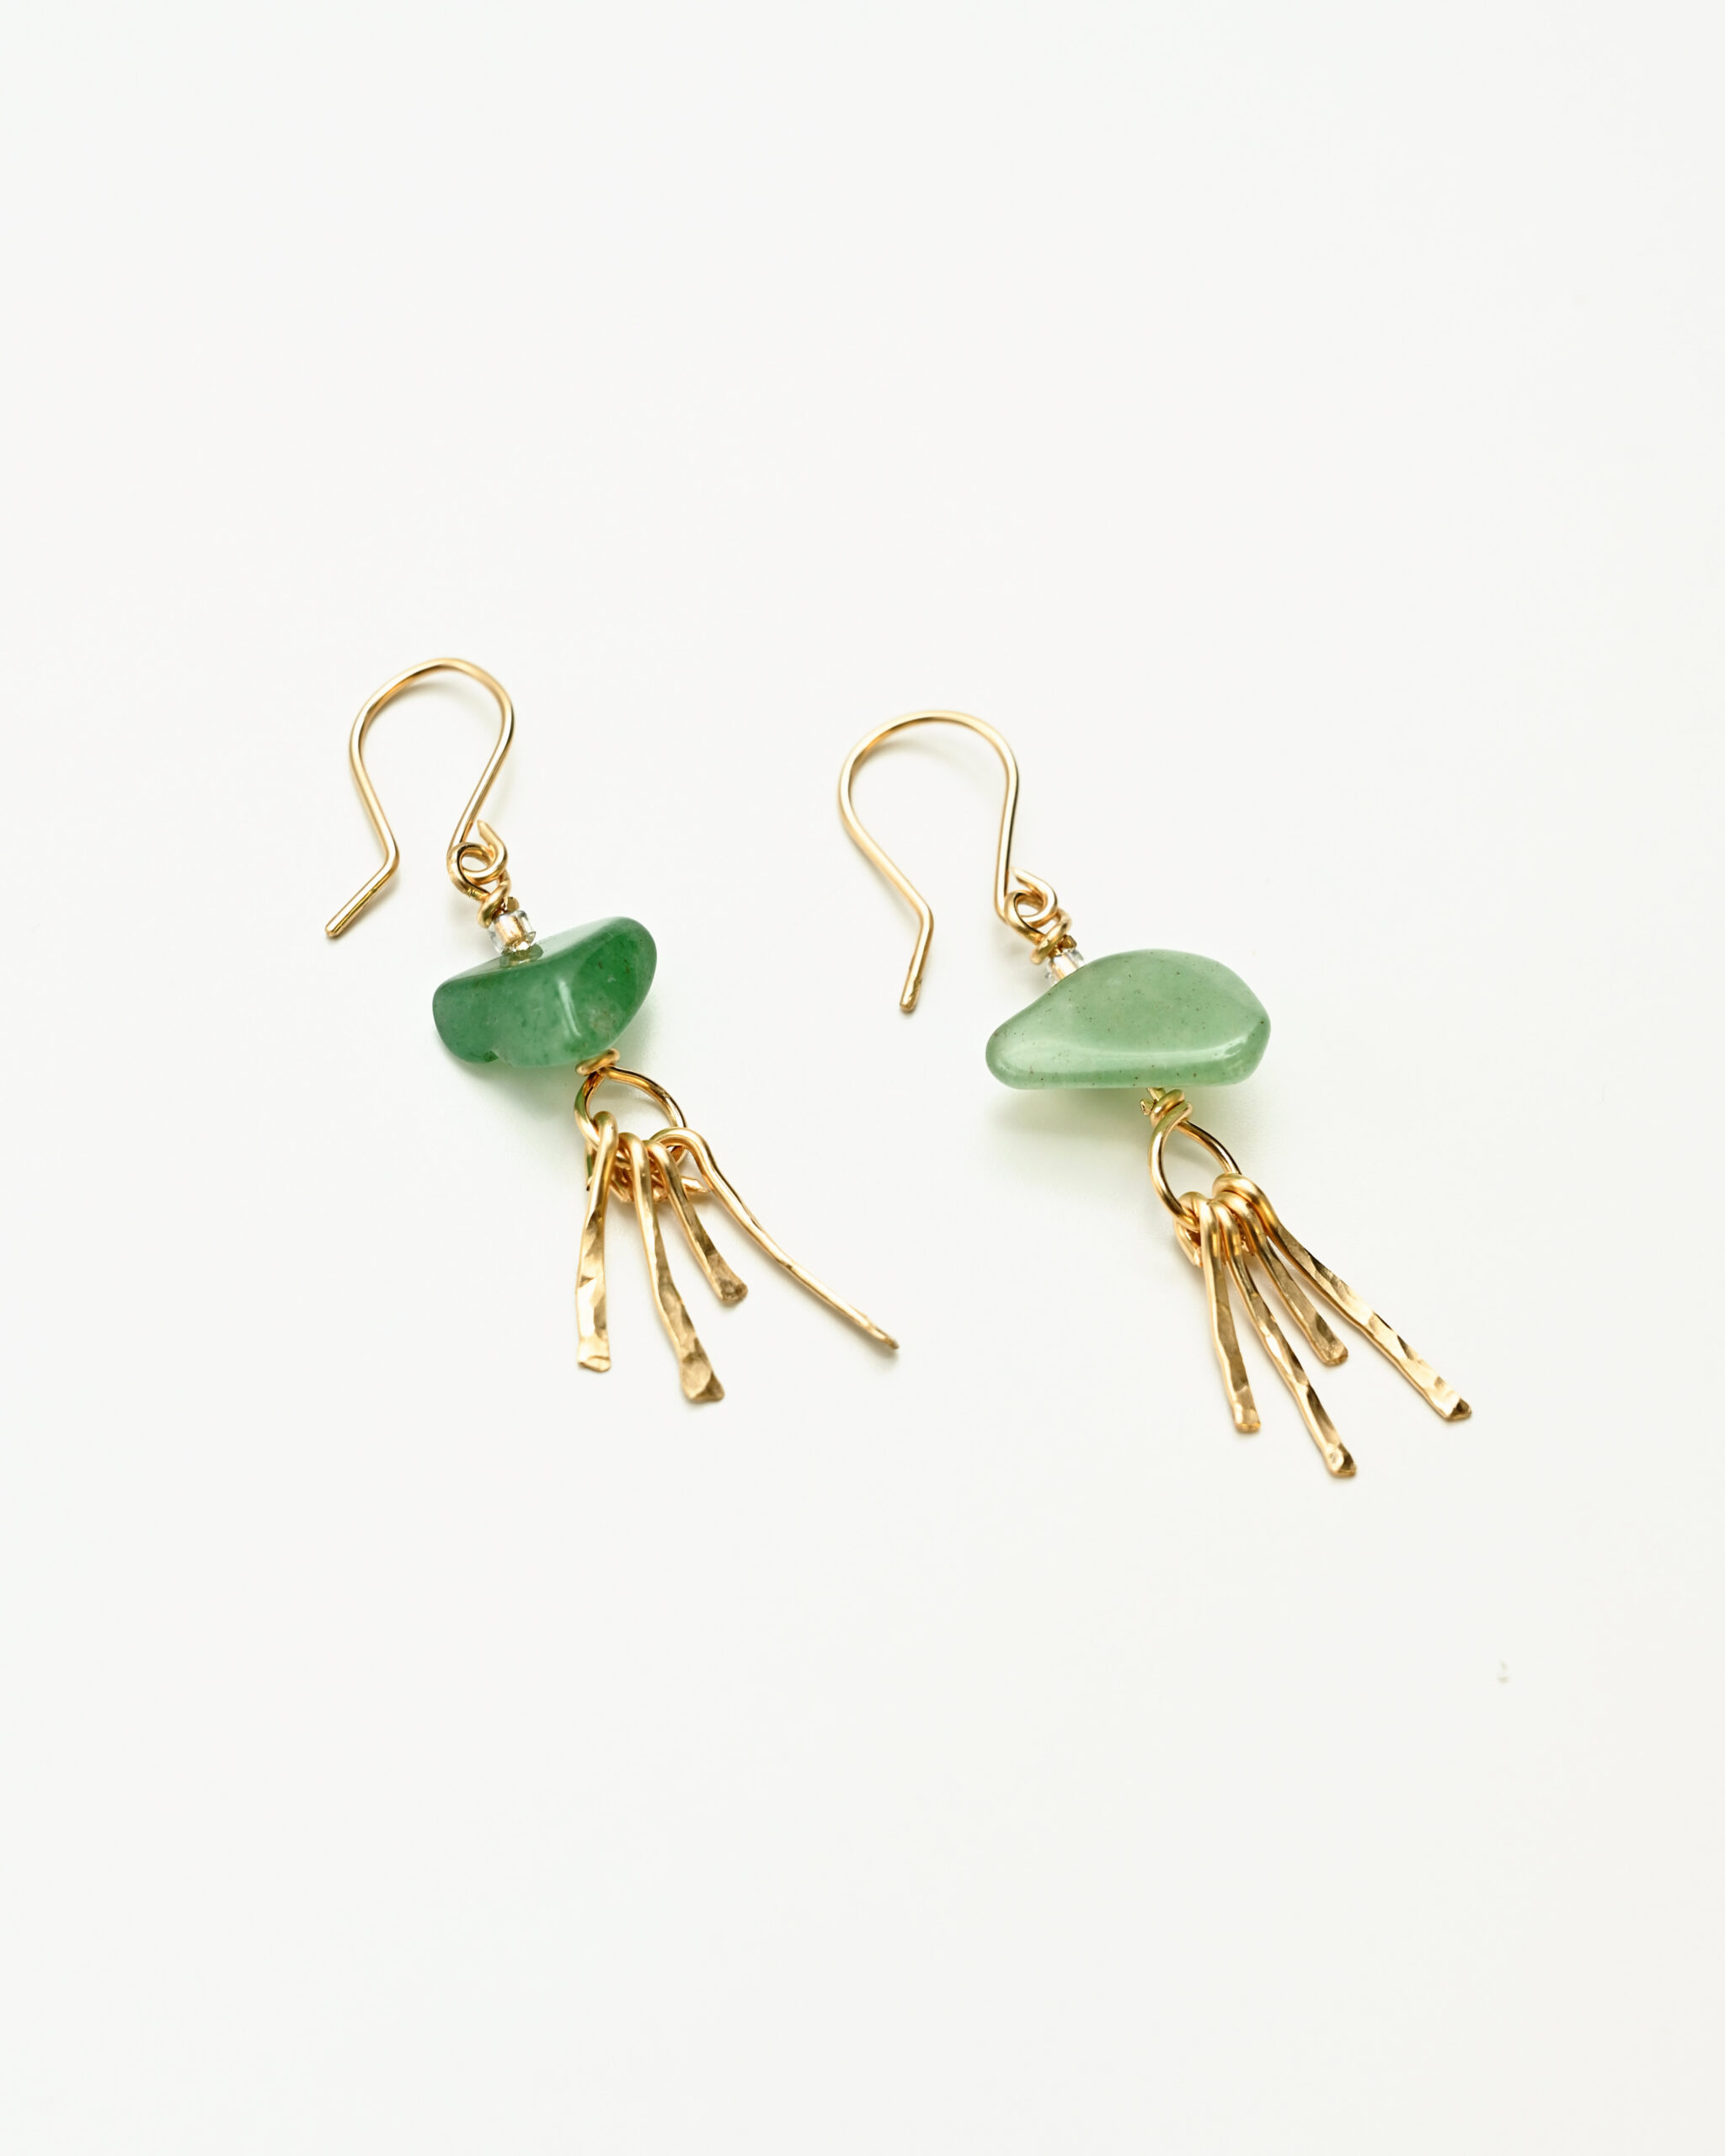 14k gold filled drop earrings with aventurine and japanese glass beads